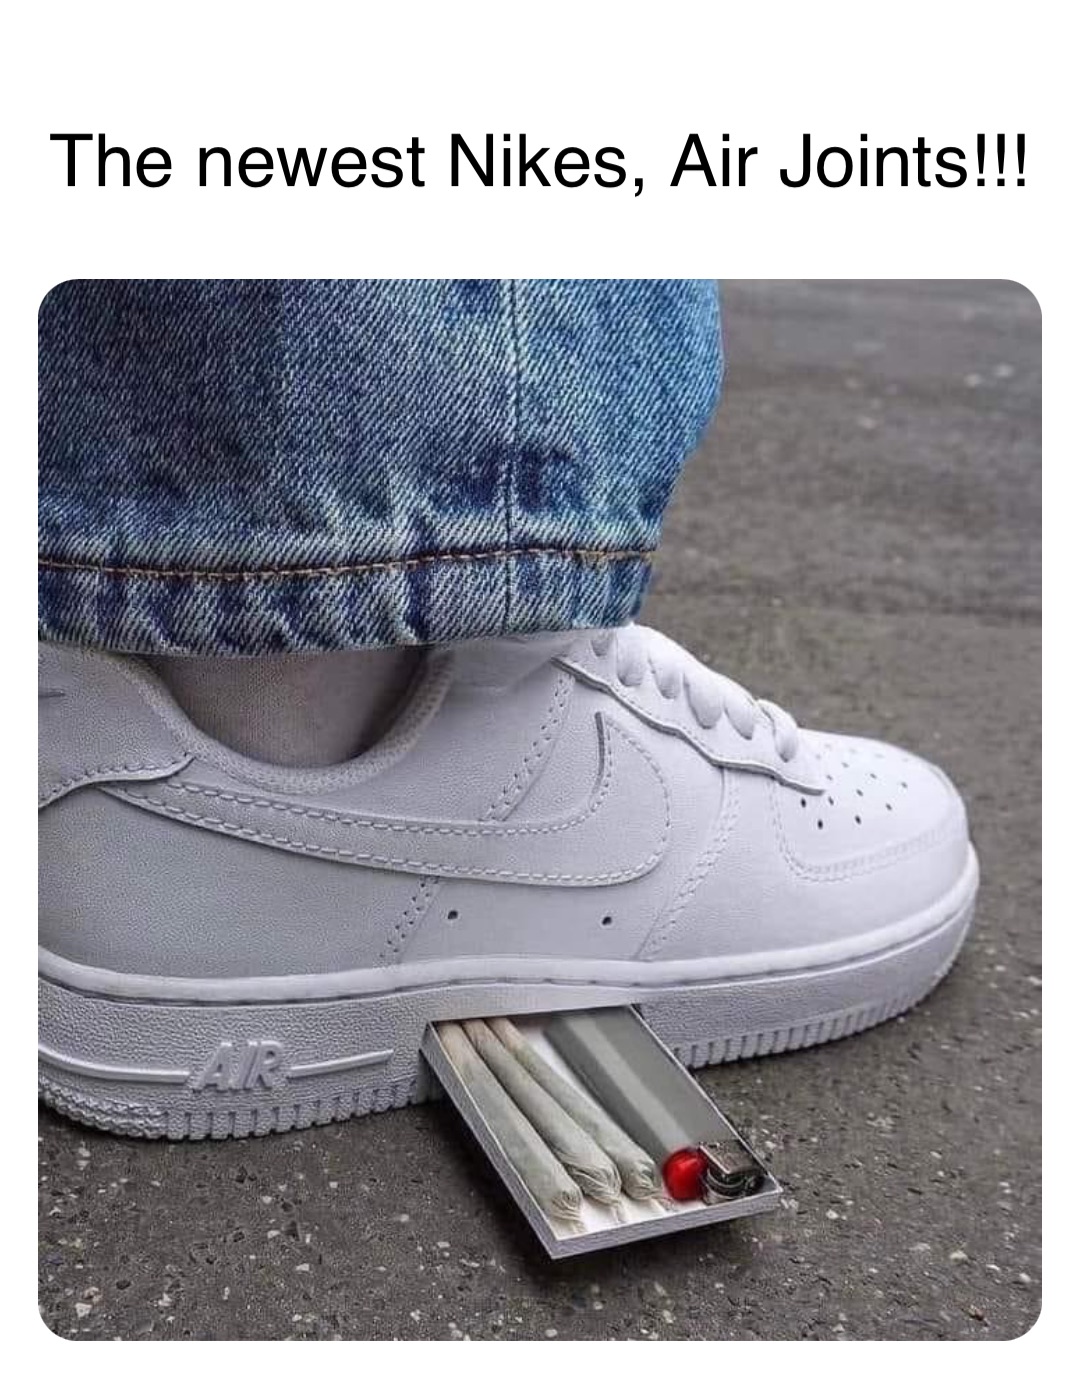 Double tap to edit The newest Nikes, Air Joints!!!